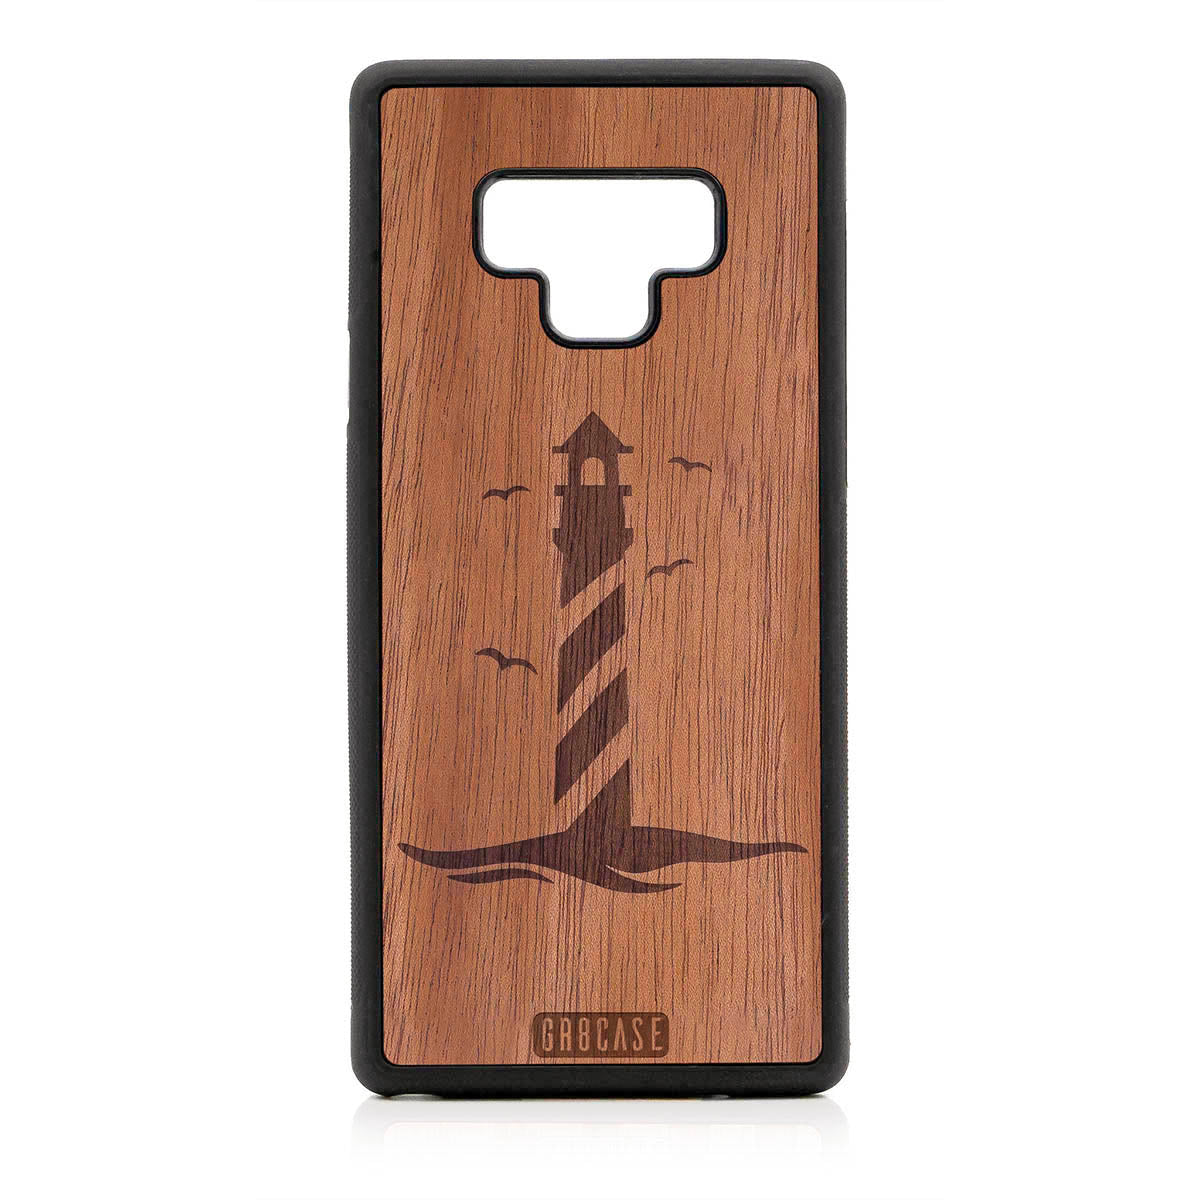 Lighthouse Design Wood Case For Samsung Galaxy Note 9